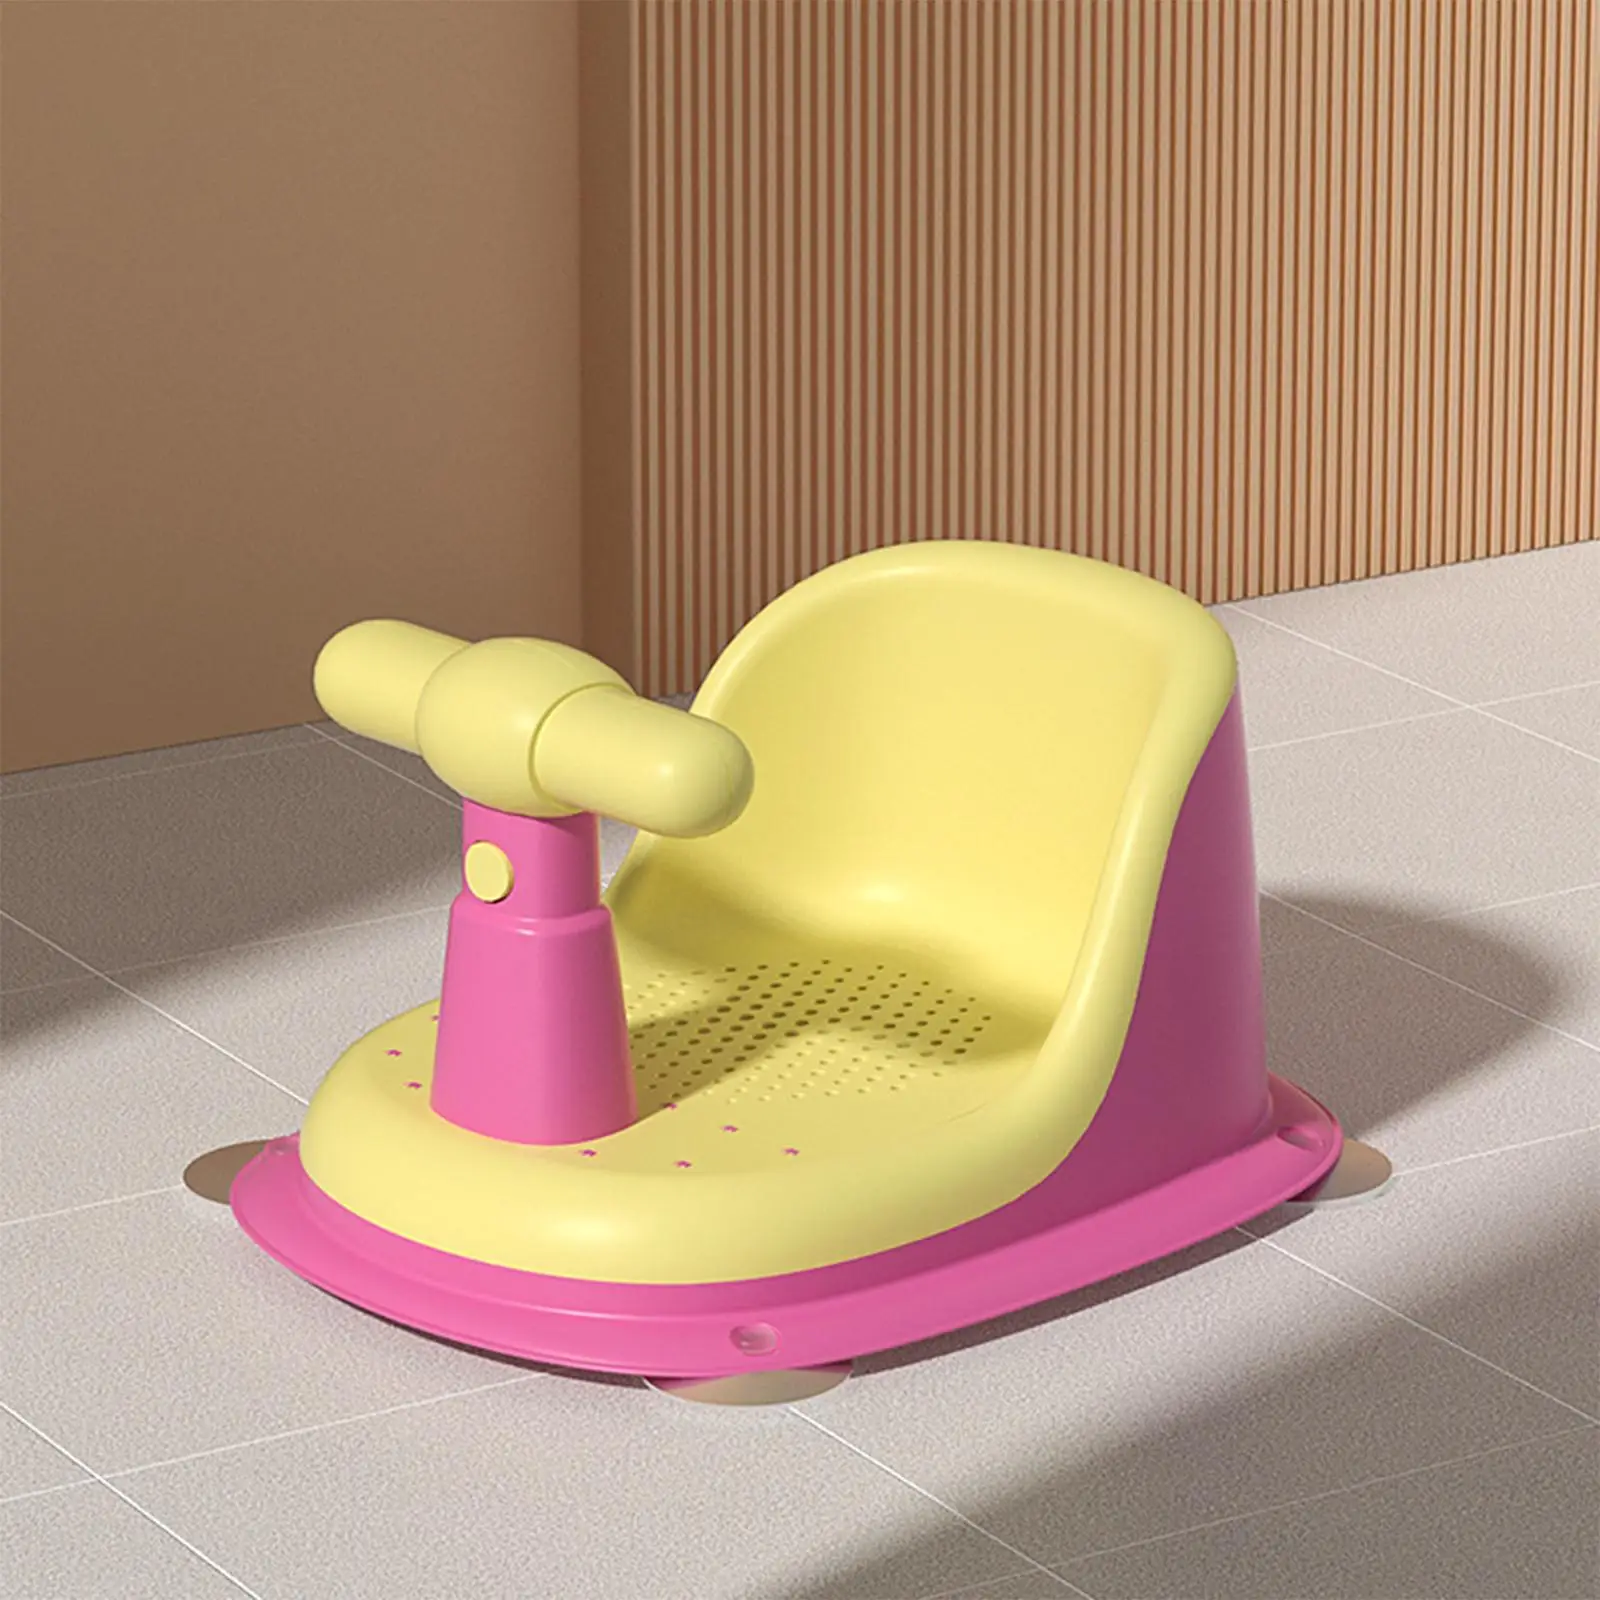 Baby Bath Tub Seat Suction Cup Bath Seat Support